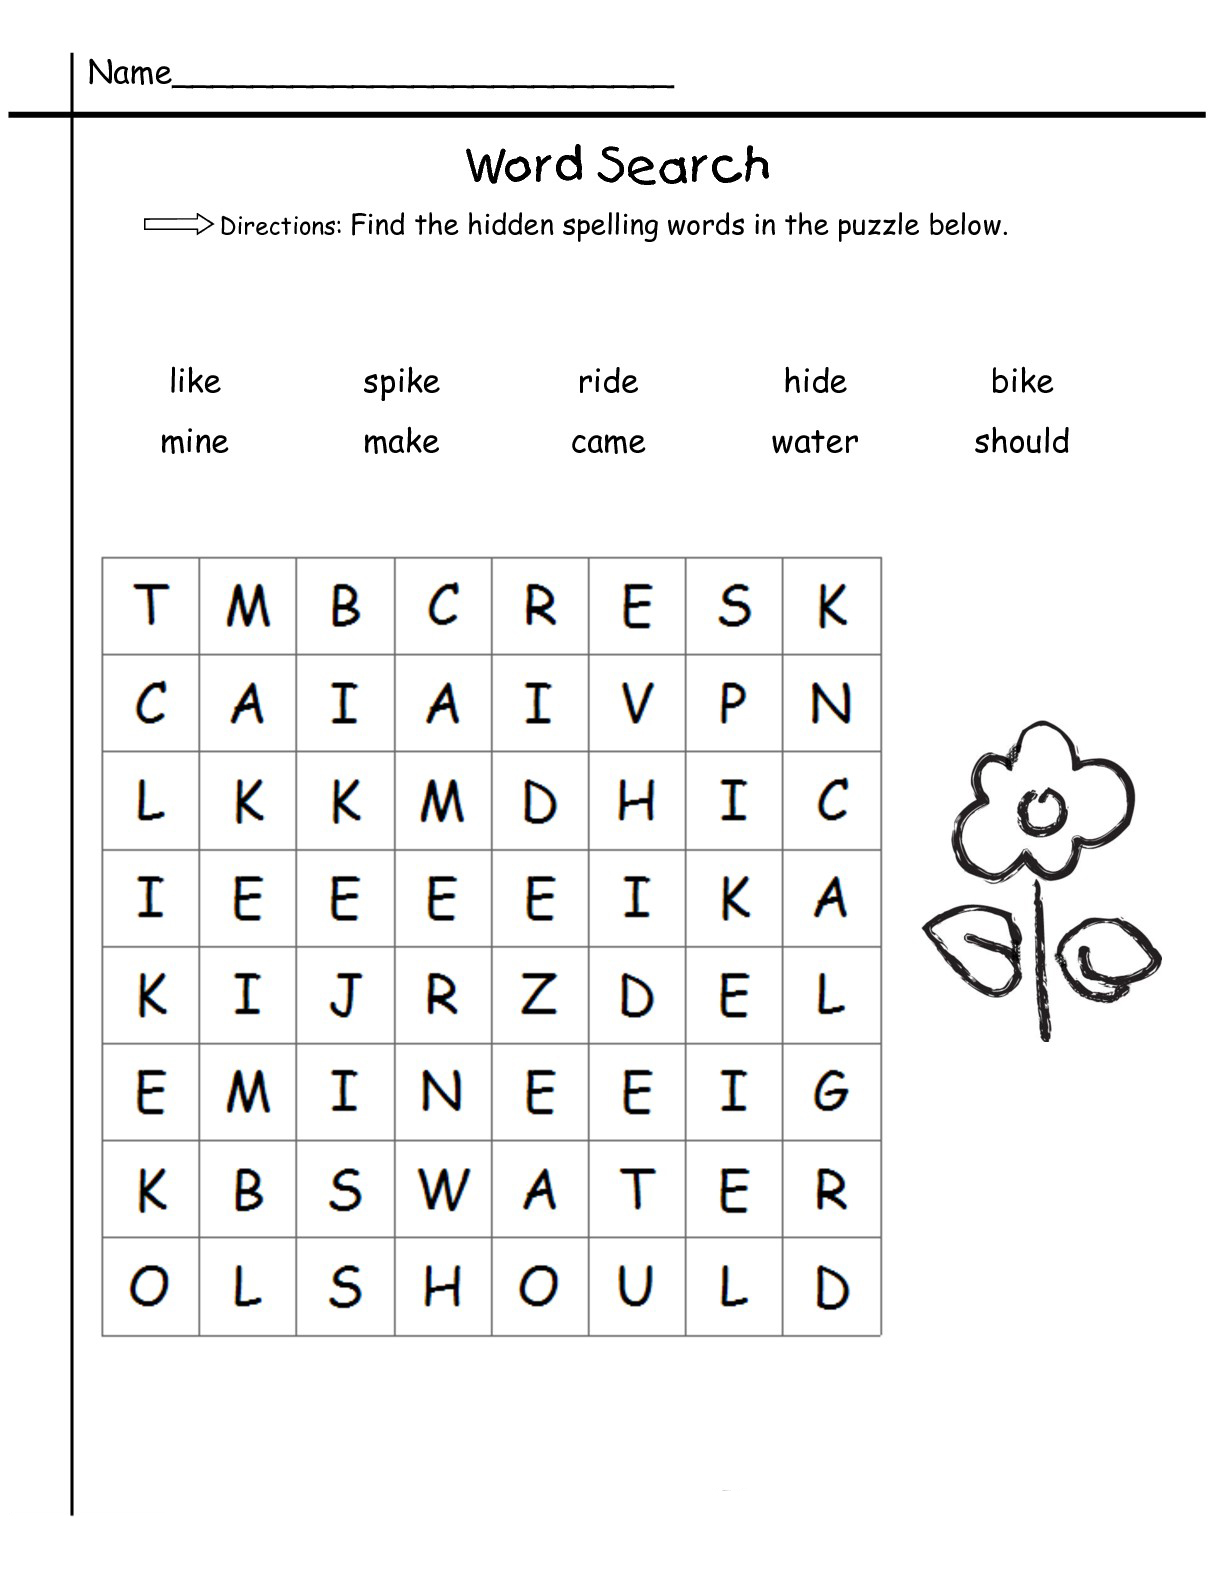 first-grade-word-search-printable